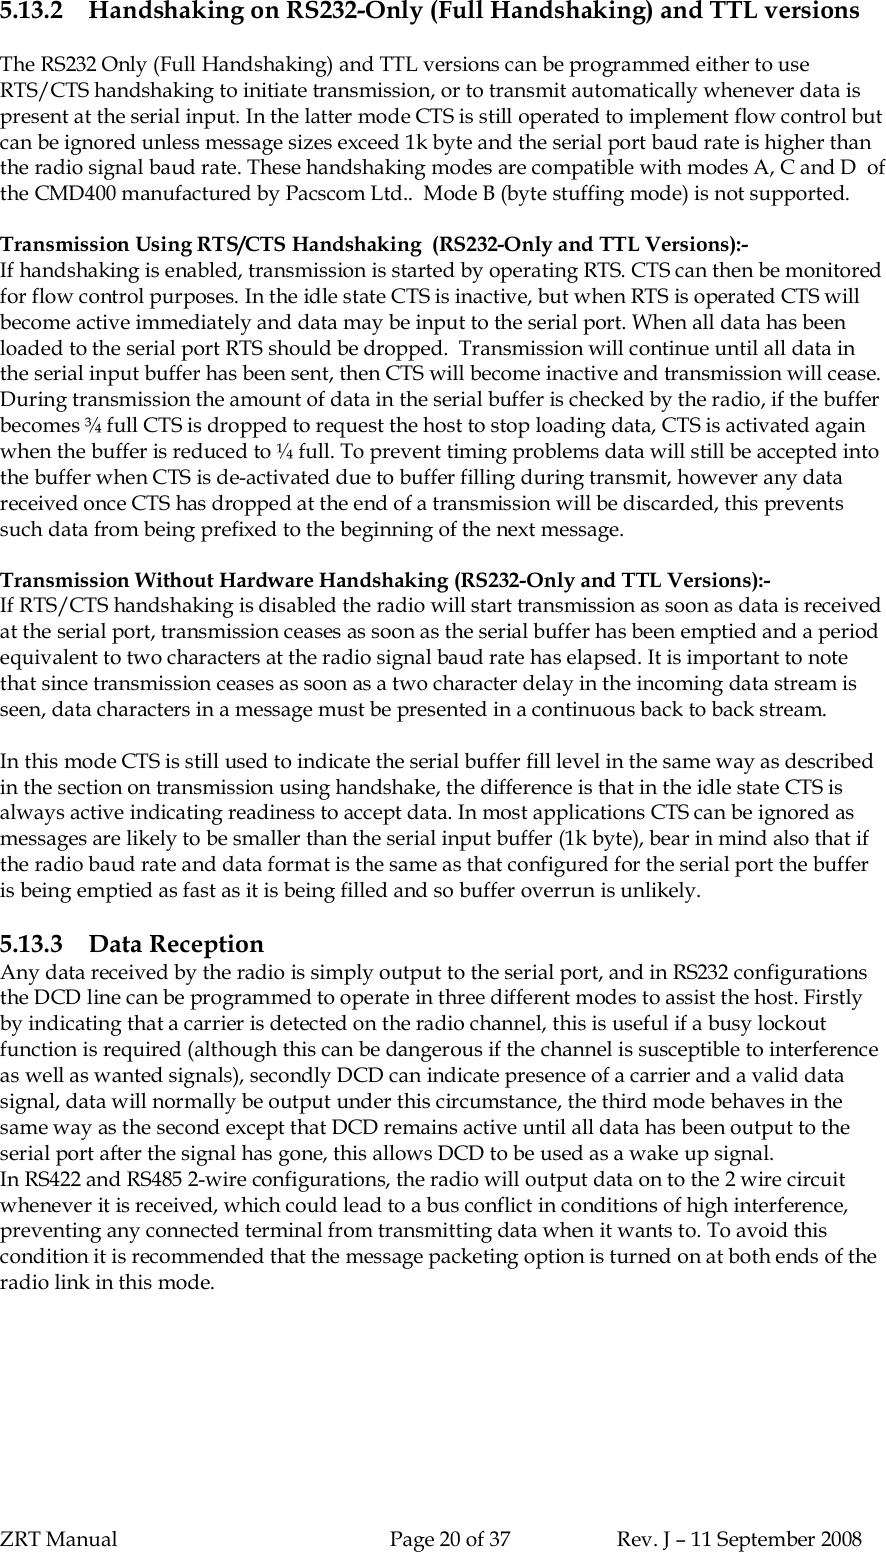 ZRT Manual Page 20 of 37 Rev. J – 11 September 20085.13.2 Handshaking on RS232-Only (Full Handshaking) and TTL versionsThe RS232 Only (Full Handshaking) and TTL versions can be programmed either to useRTS/CTS handshaking to initiate transmission, or to transmit automatically whenever data ispresent at the serial input. In the latter mode CTS is still operated to implement flow control butcan be ignored unless message sizes exceed 1k byte and the serial port baud rate is higher thanthe radio signal baud rate. These handshaking modes are compatible with modes A, C and D  ofthe CMD400 manufactured by Pacscom Ltd..  Mode B (byte stuffing mode) is not supported.Transmission Using RTS/CTS Handshaking  (RS232-Only and TTL Versions):-If handshaking is enabled, transmission is started by operating RTS. CTS can then be monitoredfor flow control purposes. In the idle state CTS is inactive, but when RTS is operated CTS willbecome active immediately and data may be input to the serial port. When all data has beenloaded to the serial port RTS should be dropped.  Transmission will continue until all data inthe serial input buffer has been sent, then CTS will become inactive and transmission will cease.During transmission the amount of data in the serial buffer is checked by the radio, if the bufferbecomes ¾ full CTS is dropped to request the host to stop loading data, CTS is activated againwhen the buffer is reduced to ¼ full. To prevent timing problems data will still be accepted intothe buffer when CTS is de-activated due to buffer filling during transmit, however any datareceived once CTS has dropped at the end of a transmission will be discarded, this preventssuch data from being prefixed to the beginning of the next message.Transmission Without Hardware Handshaking (RS232-Only and TTL Versions):-If RTS/CTS handshaking is disabled the radio will start transmission as soon as data is receivedat the serial port, transmission ceases as soon as the serial buffer has been emptied and a periodequivalent to two characters at the radio signal baud rate has elapsed. It is important to notethat since transmission ceases as soon as a two character delay in the incoming data stream isseen, data characters in a message must be presented in a continuous back to back stream.In this mode CTS is still used to indicate the serial buffer fill level in the same way as describedin the section on transmission using handshake, the difference is that in the idle state CTS isalways active indicating readiness to accept data. In most applications CTS can be ignored asmessages are likely to be smaller than the serial input buffer (1k byte), bear in mind also that ifthe radio baud rate and data format is the same as that configured for the serial port the bufferis being emptied as fast as it is being filled and so buffer overrun is unlikely.5.13.3 Data ReceptionAny data received by the radio is simply output to the serial port, and in RS232 configurationsthe DCD line can be programmed to operate in three different modes to assist the host. Firstlyby indicating that a carrier is detected on the radio channel, this is useful if a busy lockoutfunction is required (although this can be dangerous if the channel is susceptible to interferenceas well as wanted signals), secondly DCD can indicate presence of a carrier and a valid datasignal, data will normally be output under this circumstance, the third mode behaves in thesame way as the second except that DCD remains active until all data has been output to theserial port after the signal has gone, this allows DCD to be used as a wake up signal.In RS422 and RS485 2-wire configurations, the radio will output data on to the 2 wire circuitwhenever it is received, which could lead to a bus conflict in conditions of high interference,preventing any connected terminal from transmitting data when it wants to. To avoid thiscondition it is recommended that the message packeting option is turned on at both ends of theradio link in this mode.